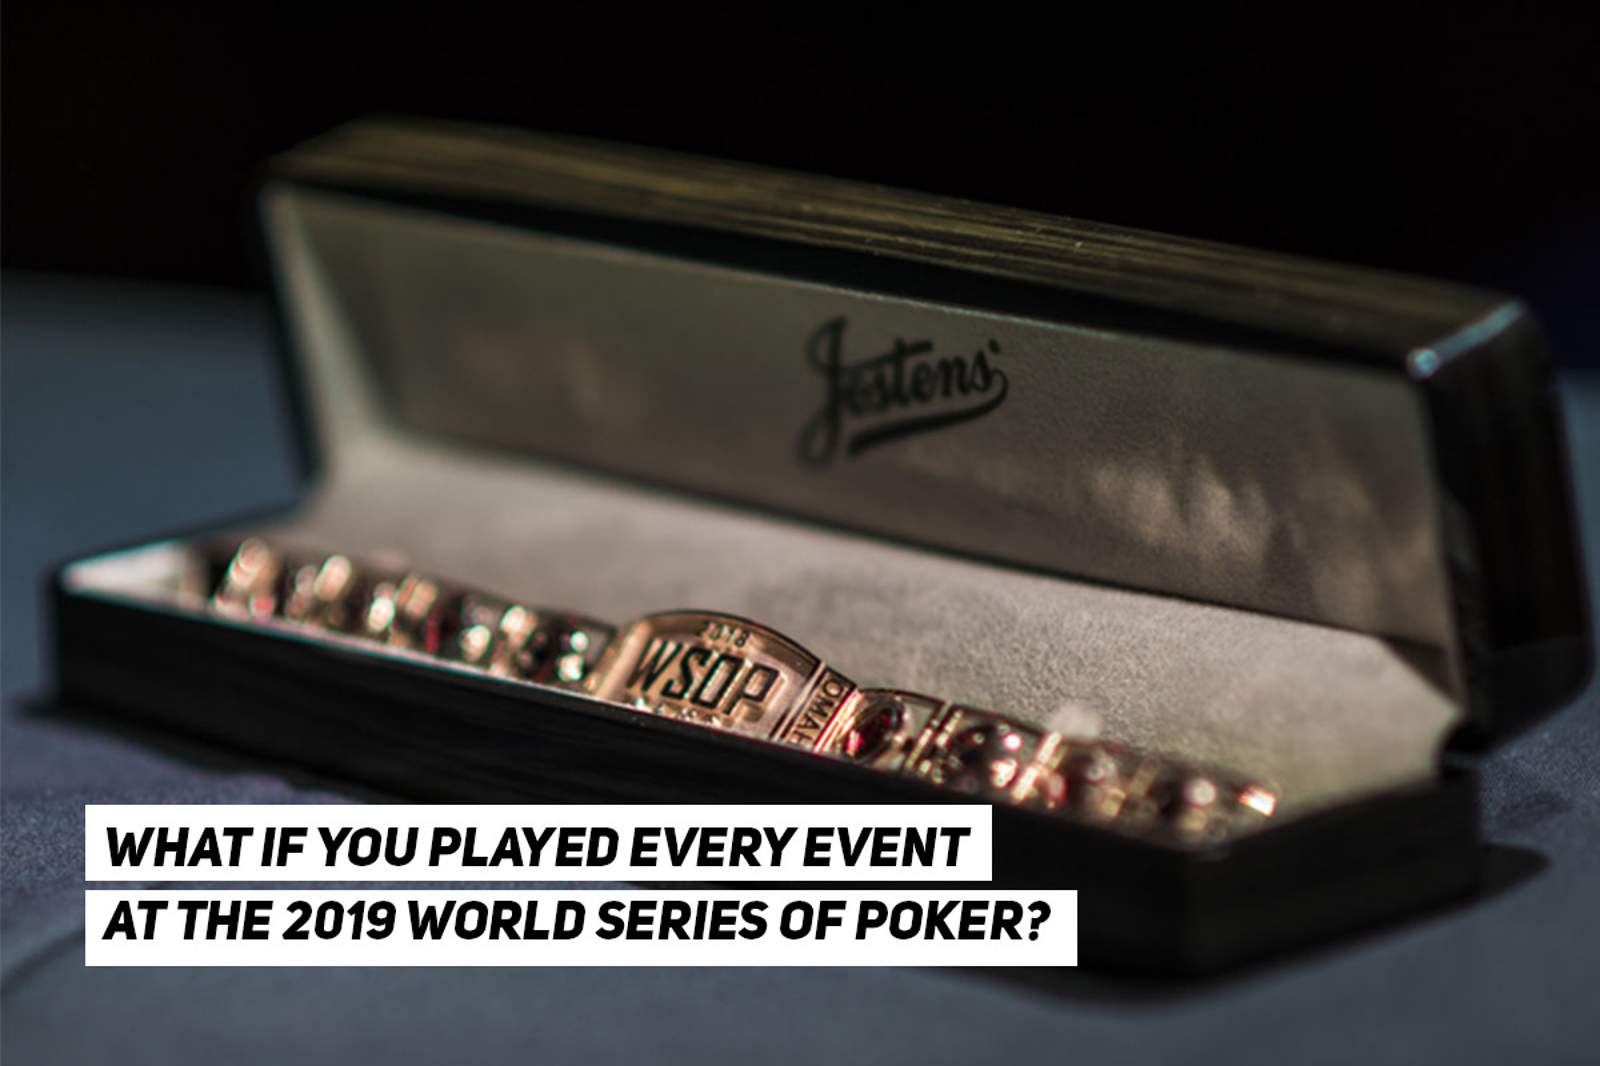 What if... You Played Every Event at the 2019 World Series of Poker?